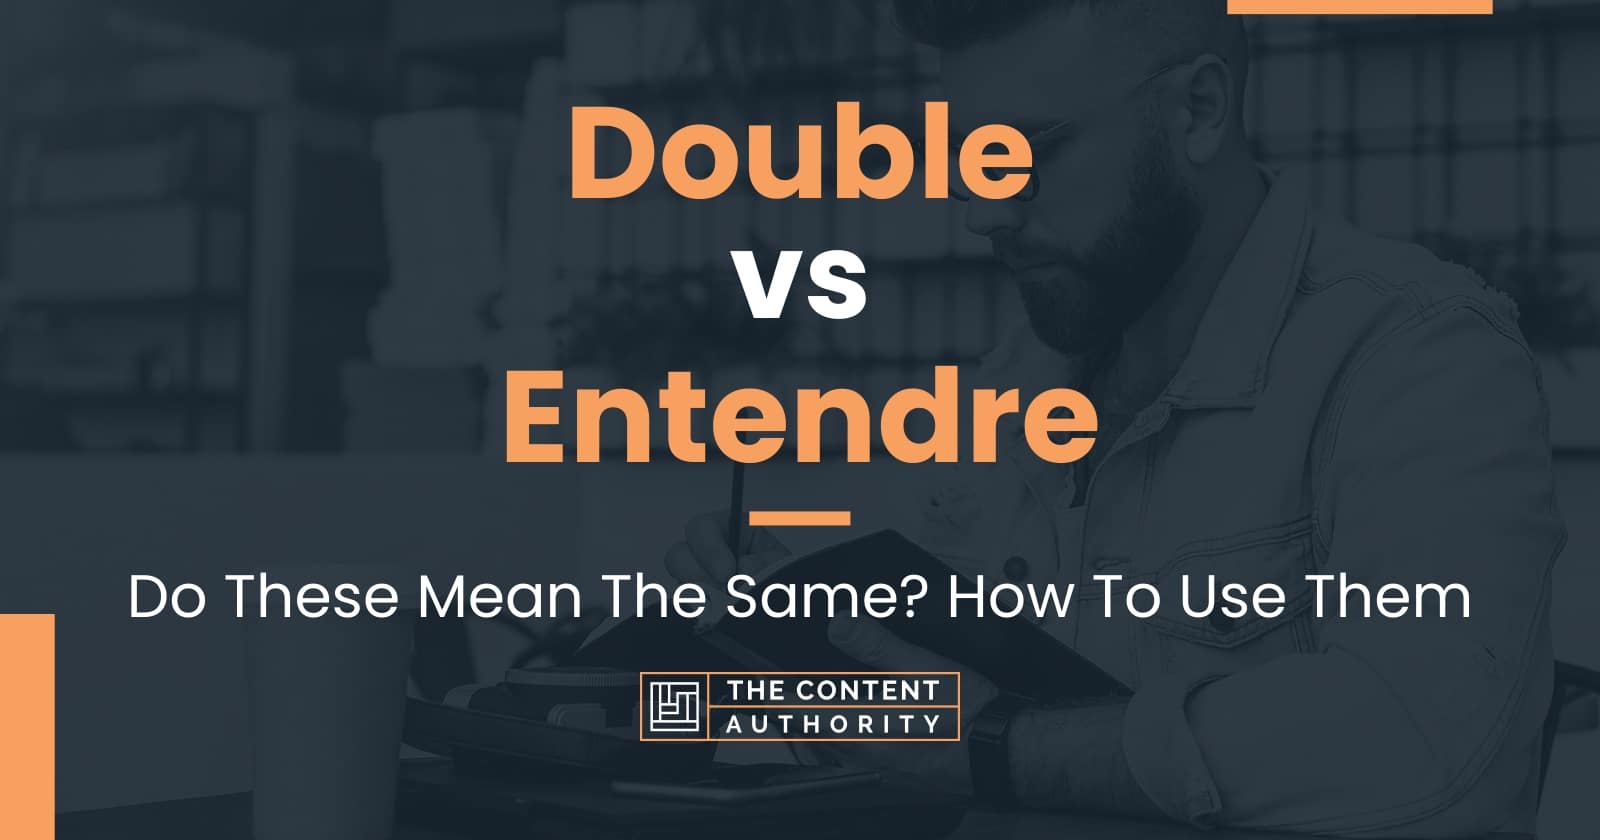 Double vs Entendre: Do These Mean The Same? How To Use Them